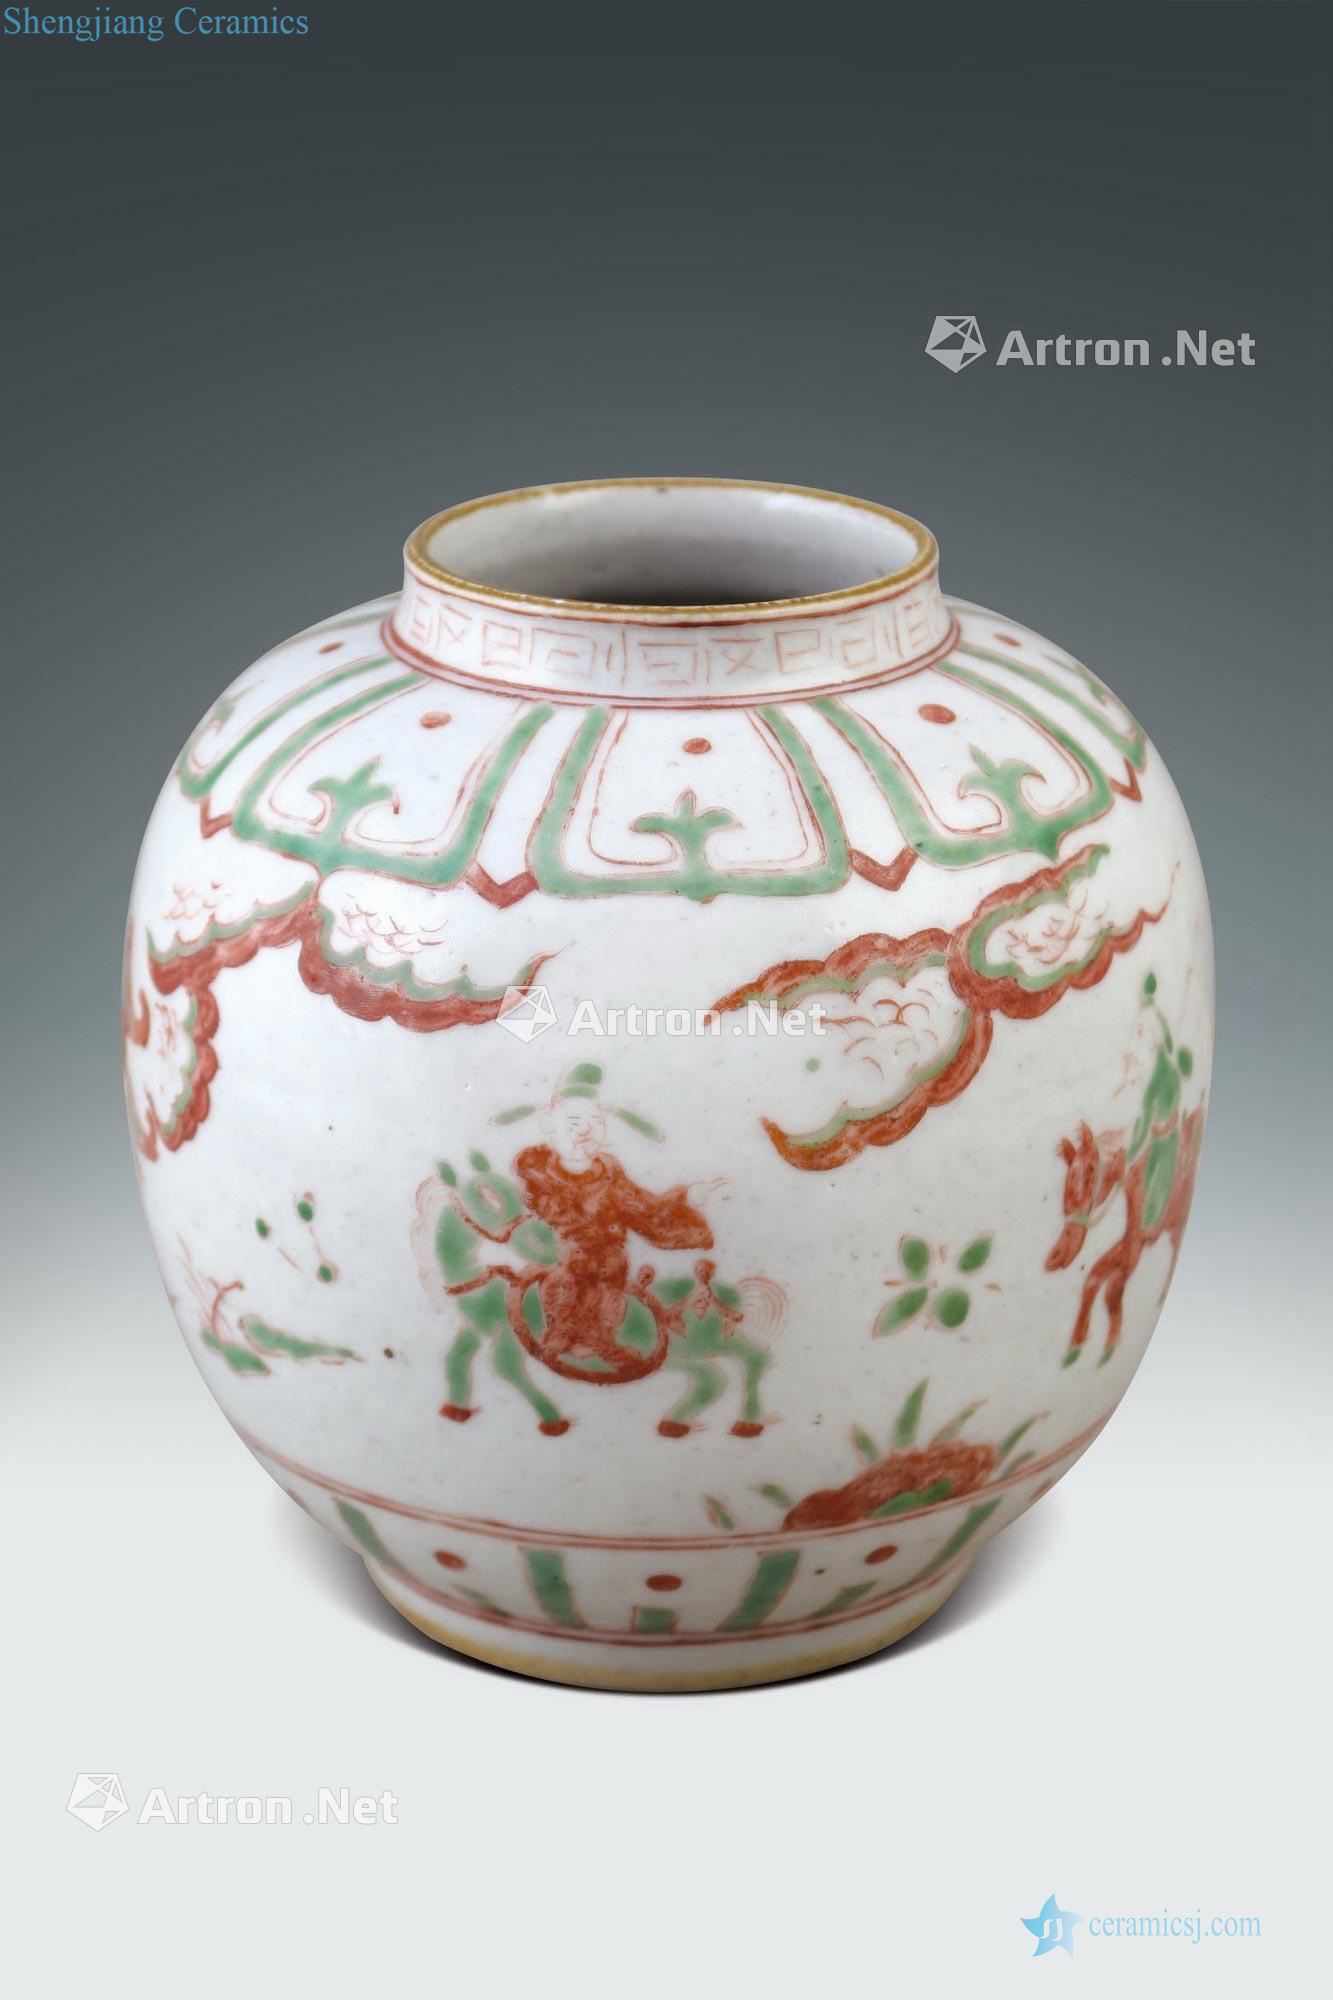 Bright red and green grain porcelain color characters